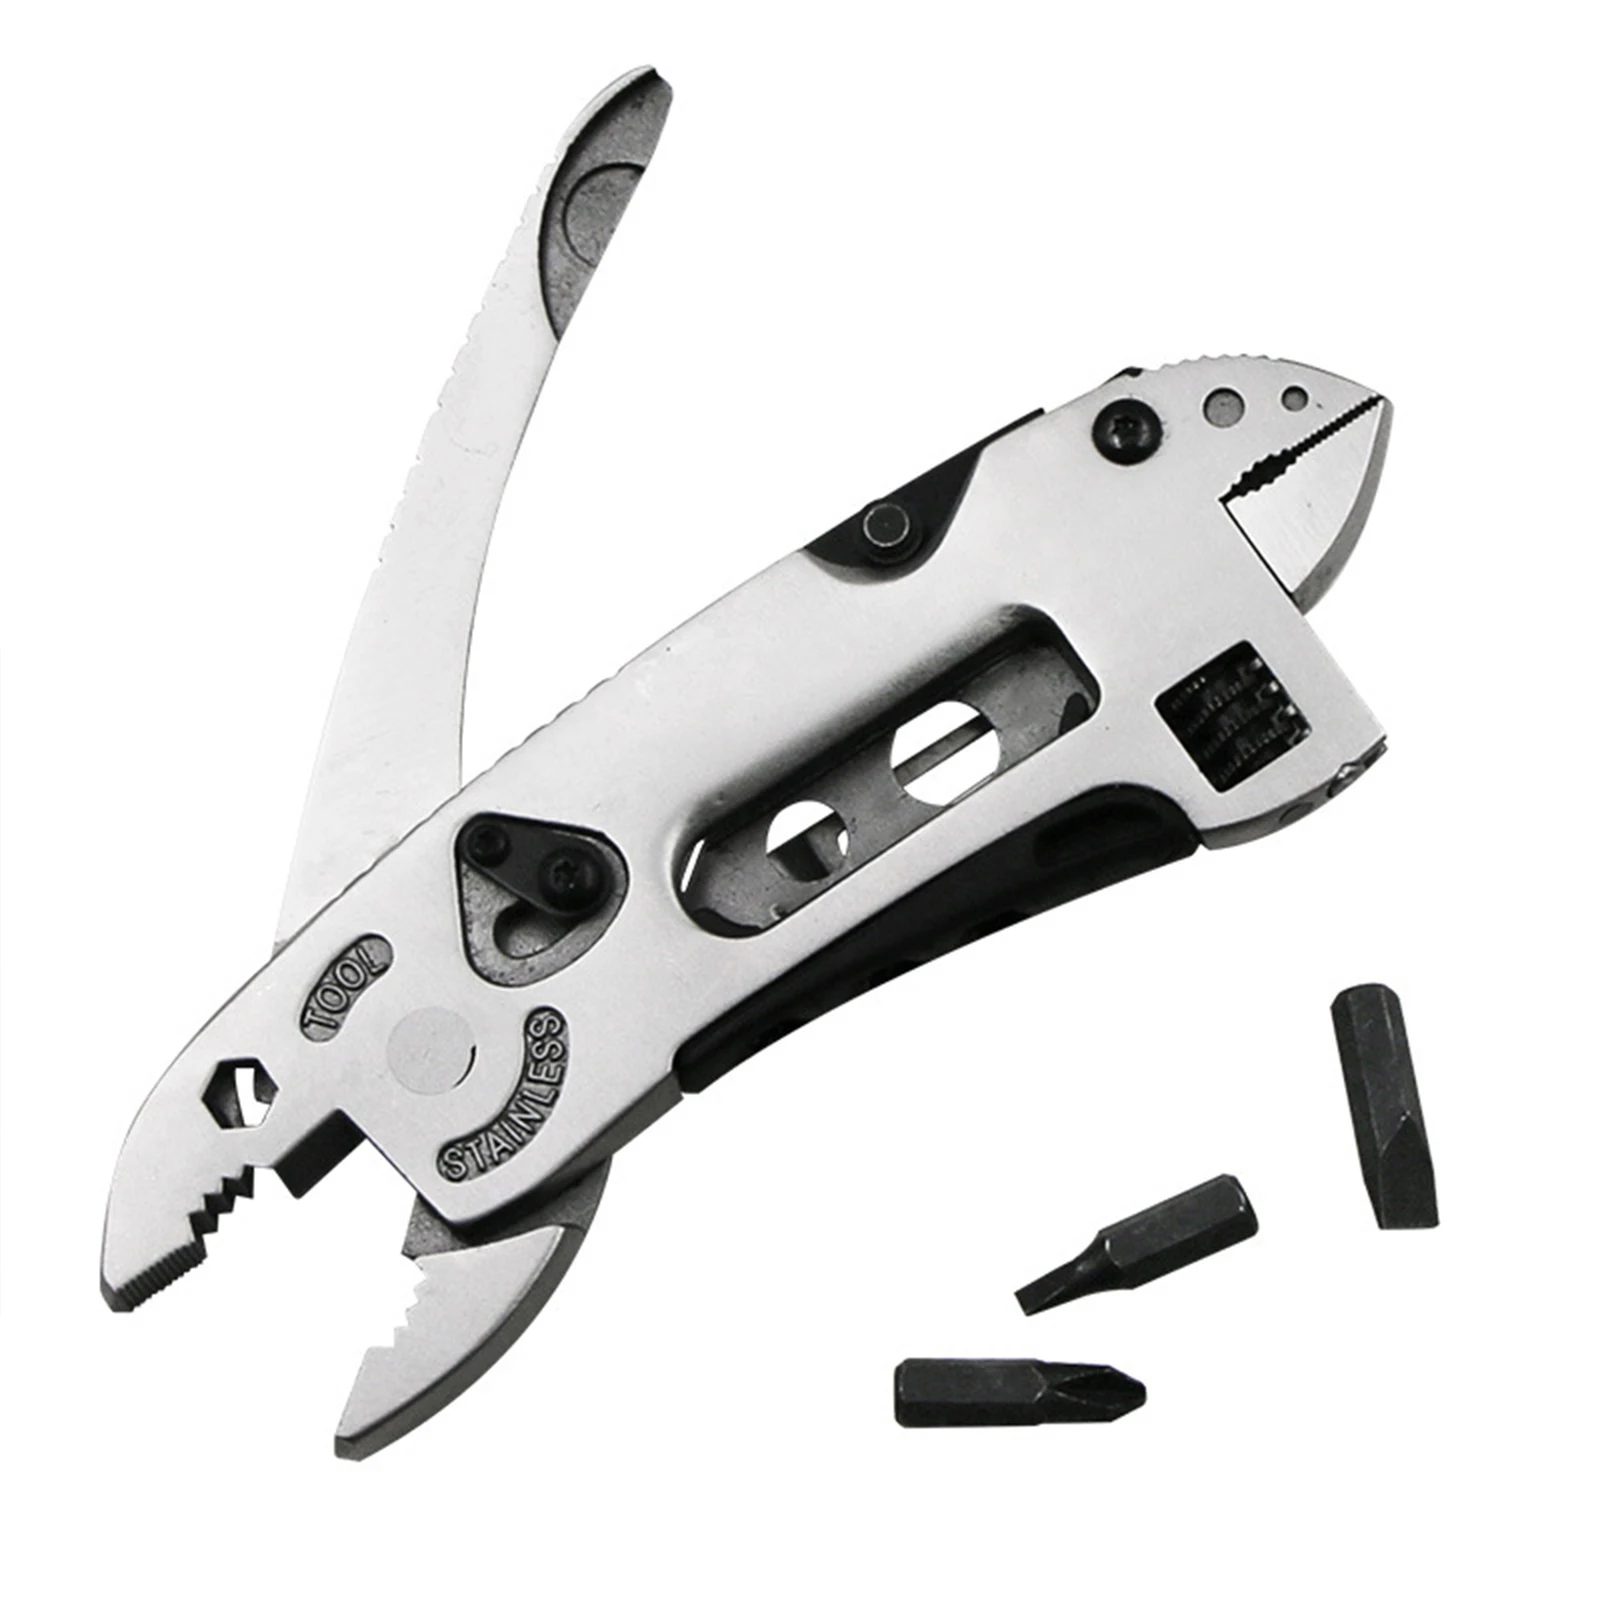 

Multitool Pliers Pocket Knife Screwdriver Set Kit Adjustable Wrench Jaw Spanner Repair Outdoor Camping Survival Multi Tools